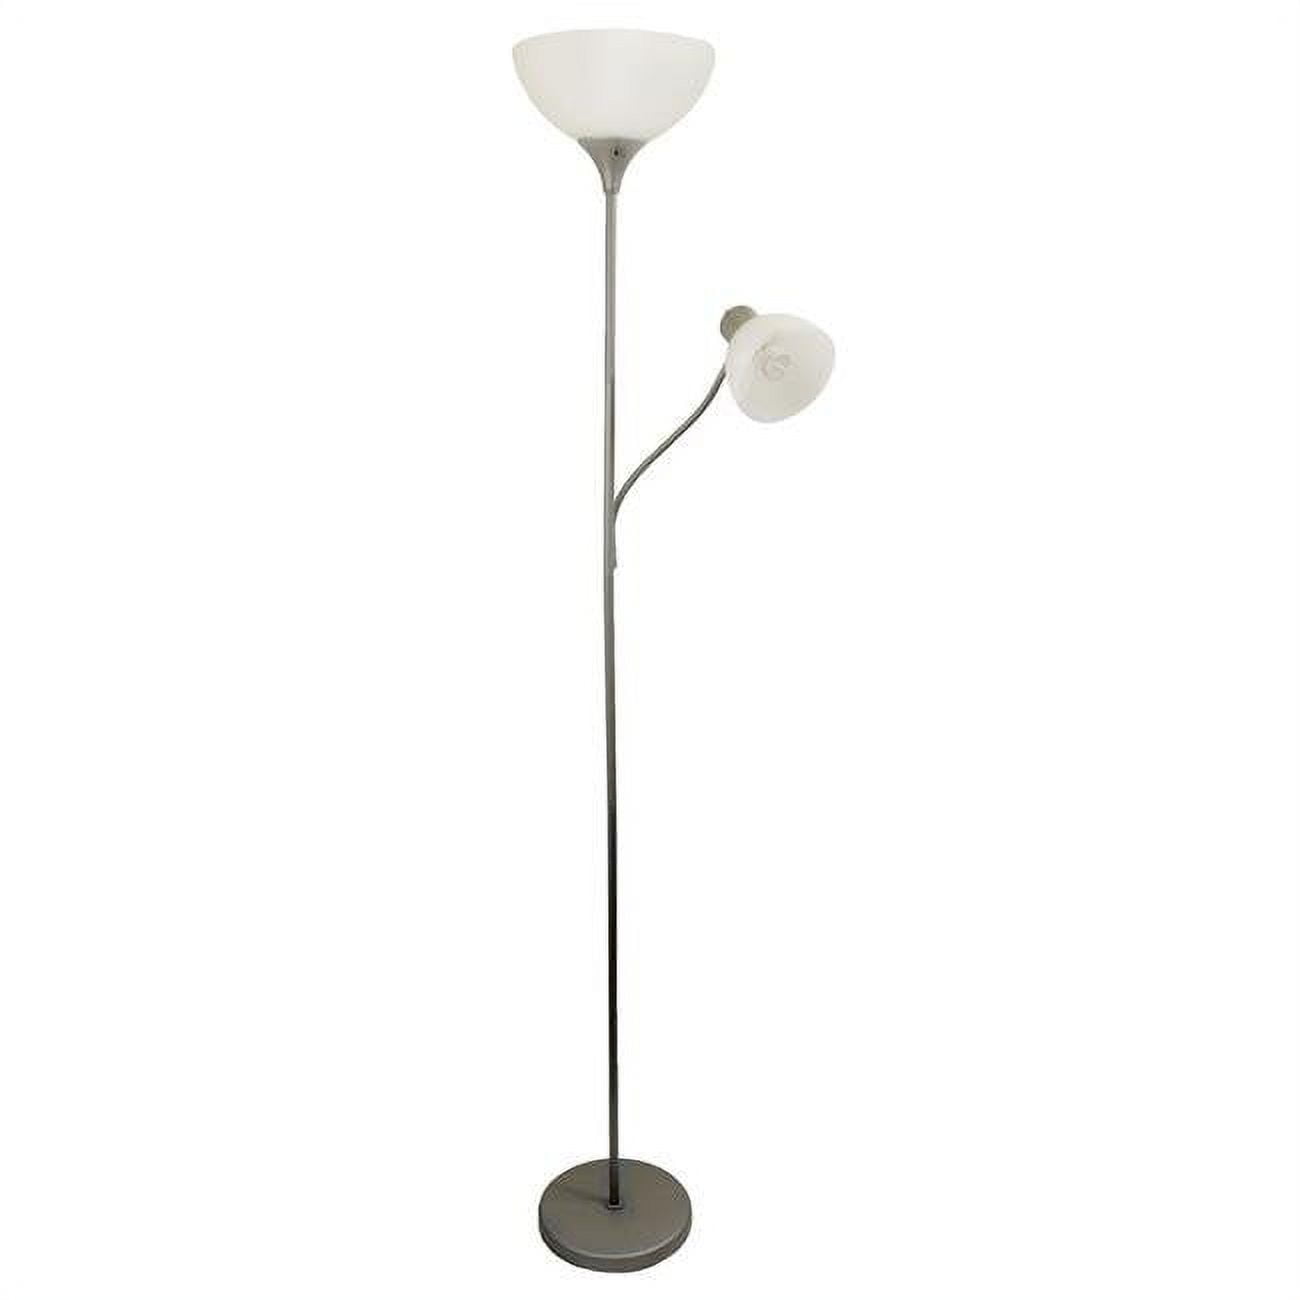 Alltherages Lf2000-wht Simple Designs Floor Lamp With Reading Light, White